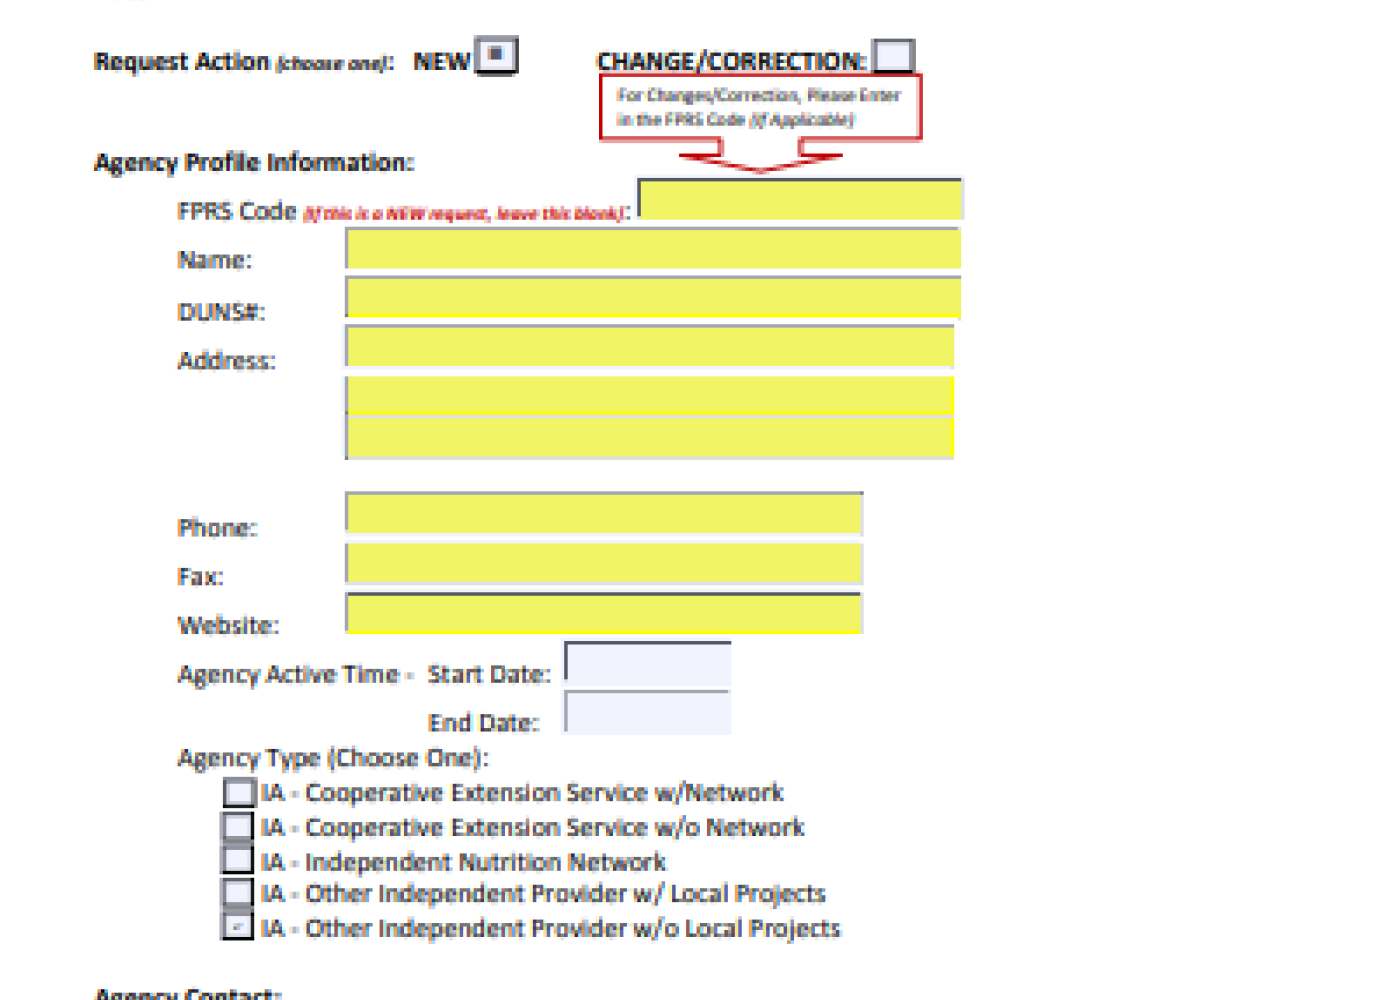 SNAP-Ed State and Implementing Agency Profile Request Form